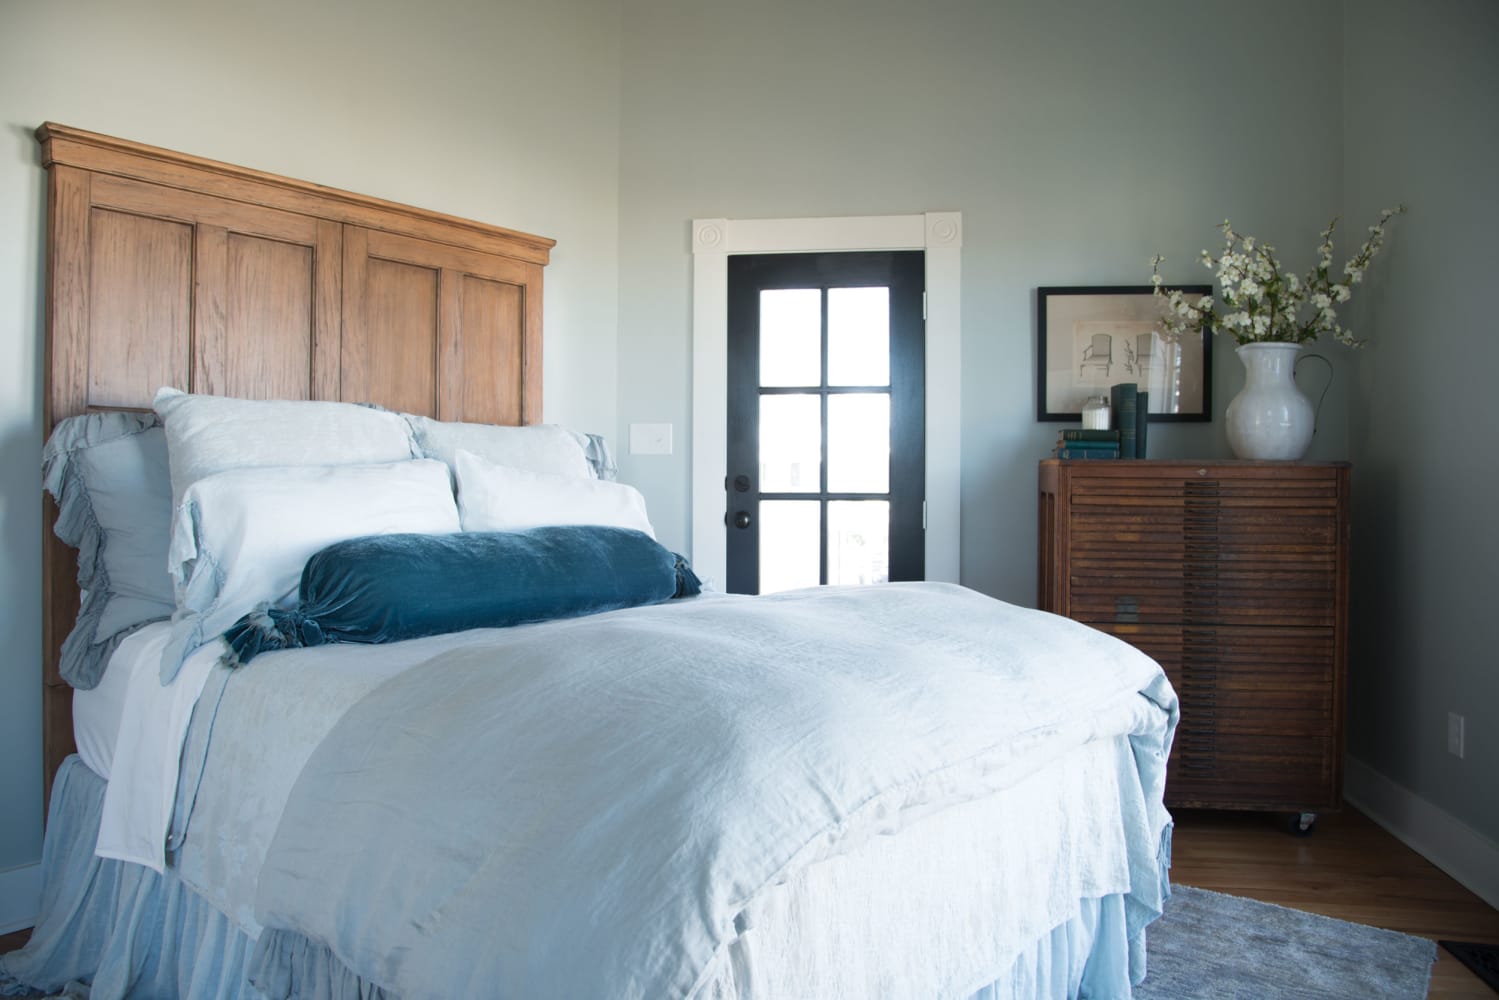 Light blue grey paint color on walls of bedroom with country, relaxed farmhouse style at The Magnolia House in McGregor, TX. Design by Joanna Gaines.